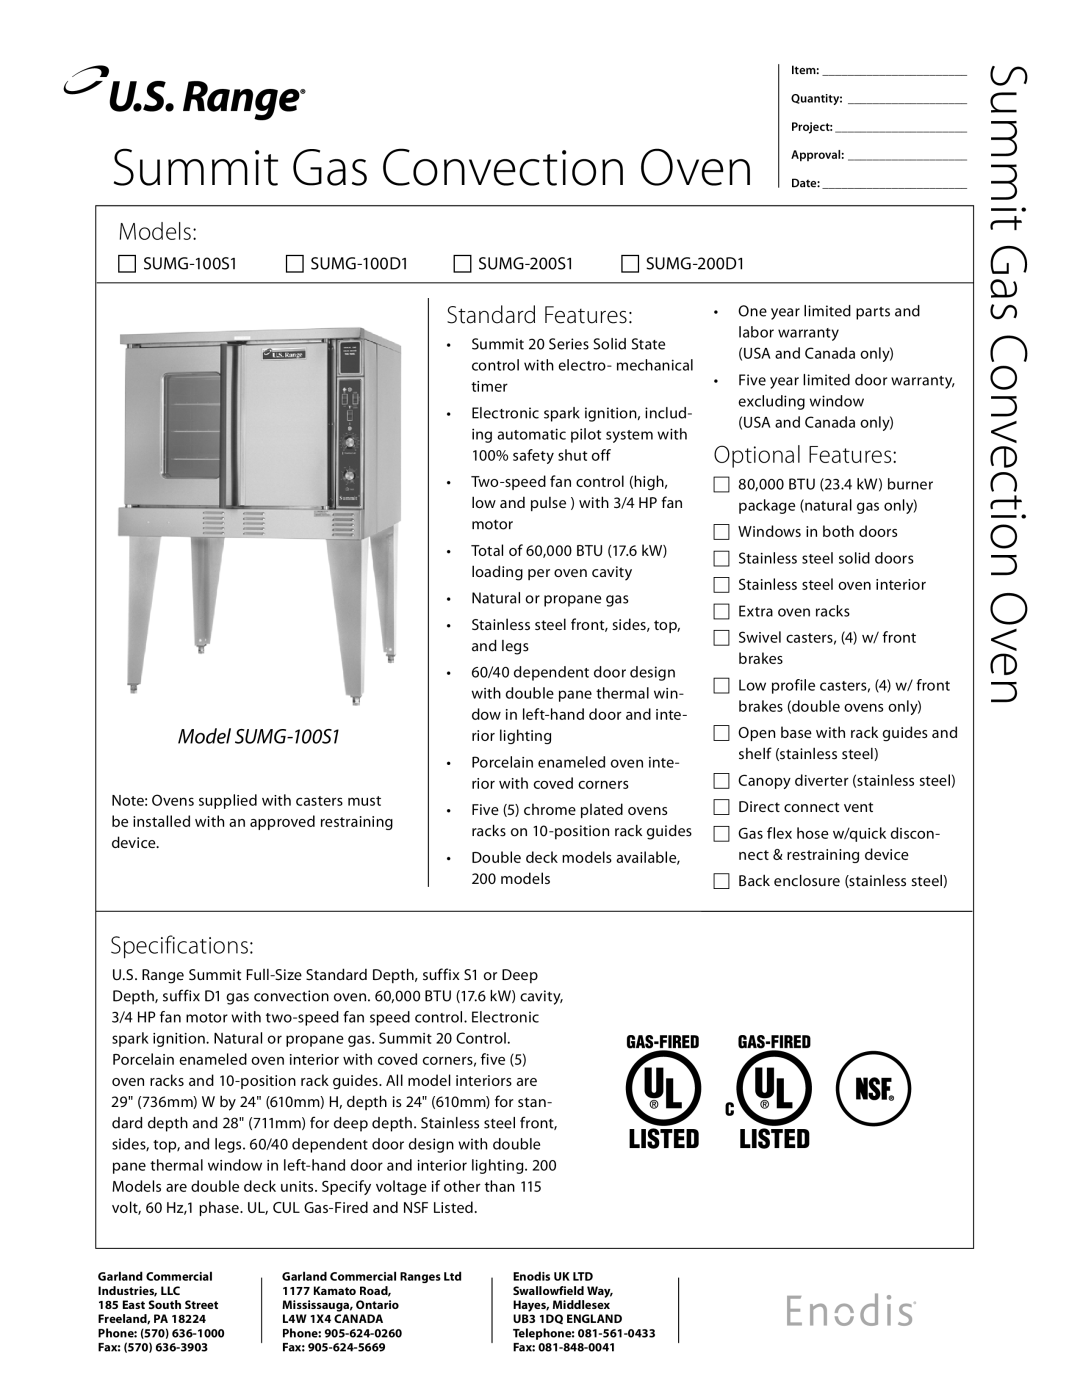 Garland SUMG100D1 specifications Convection Oven, Summit Gas, Models, Standard Features, Optional Features, Specifications 